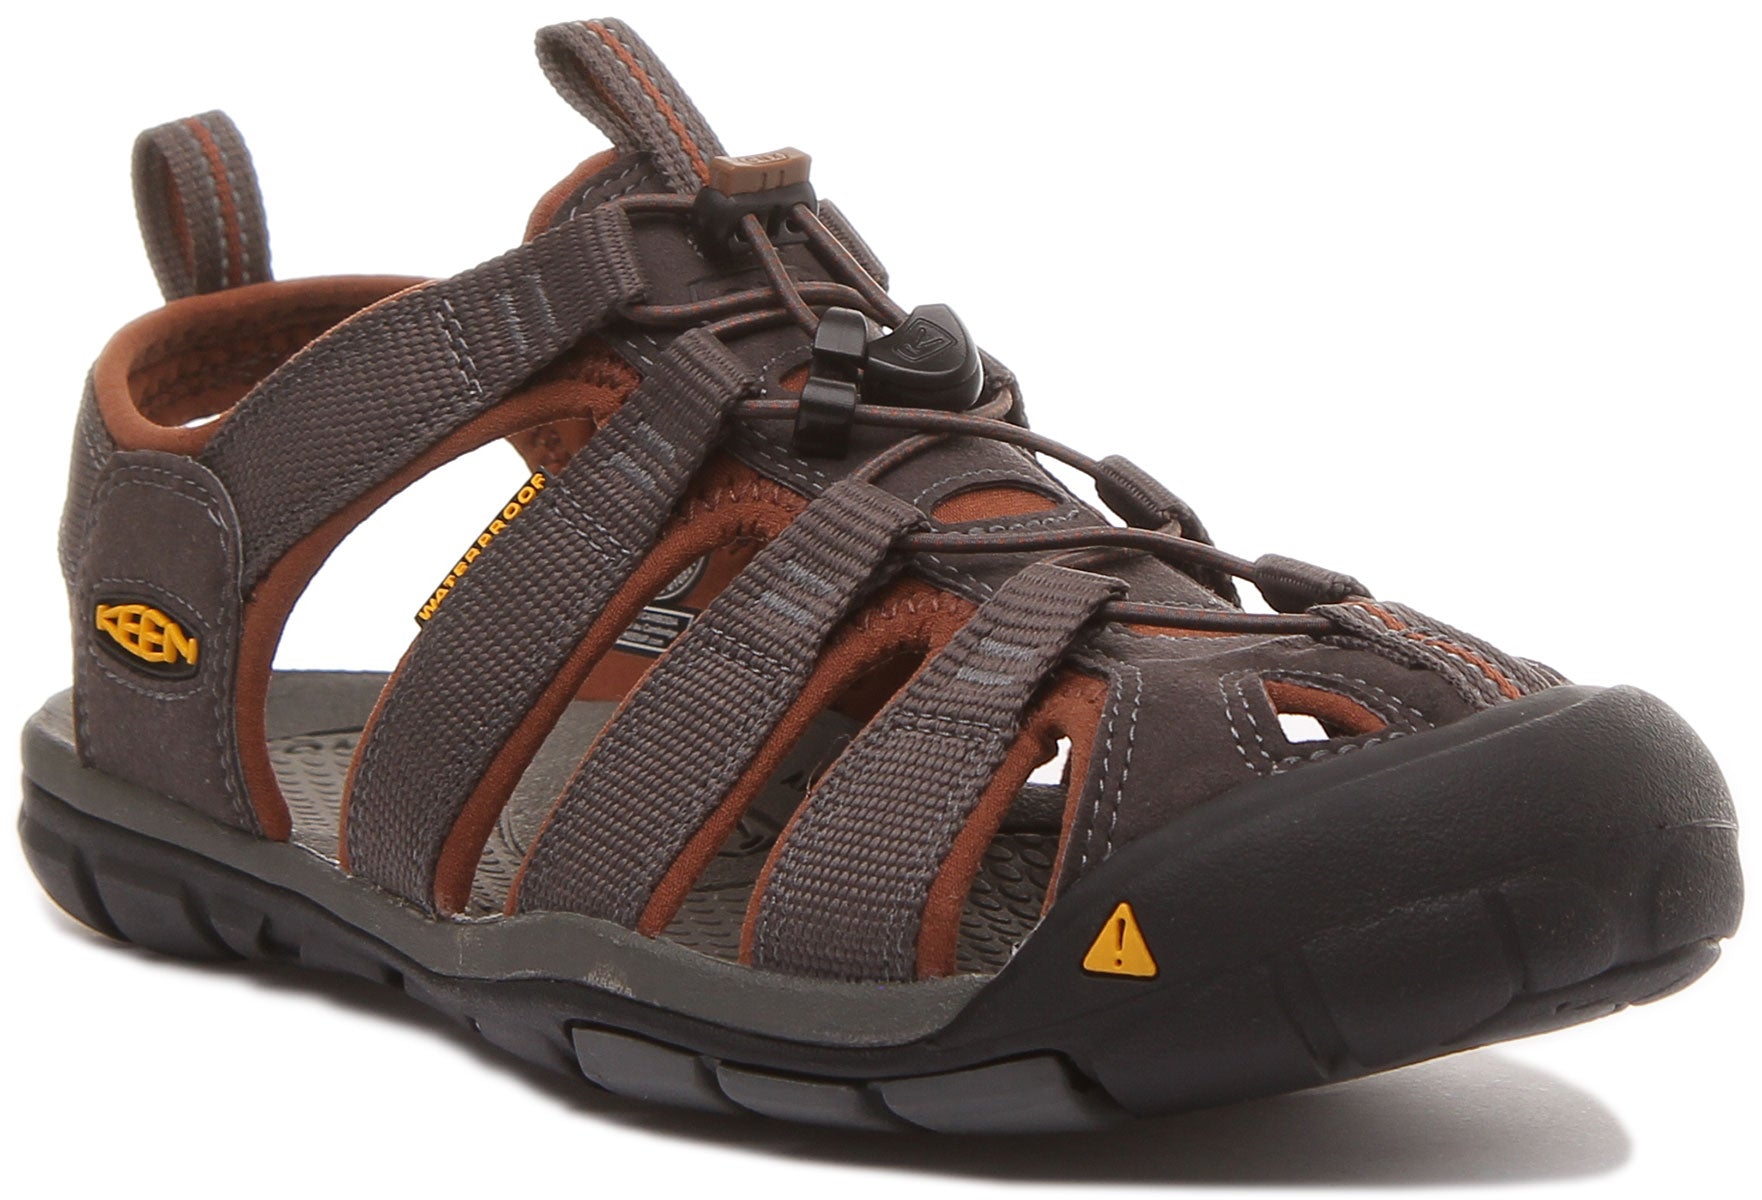 Keen Clearwater CNX ligera impermeable poliéster para homb – 4feetshoes